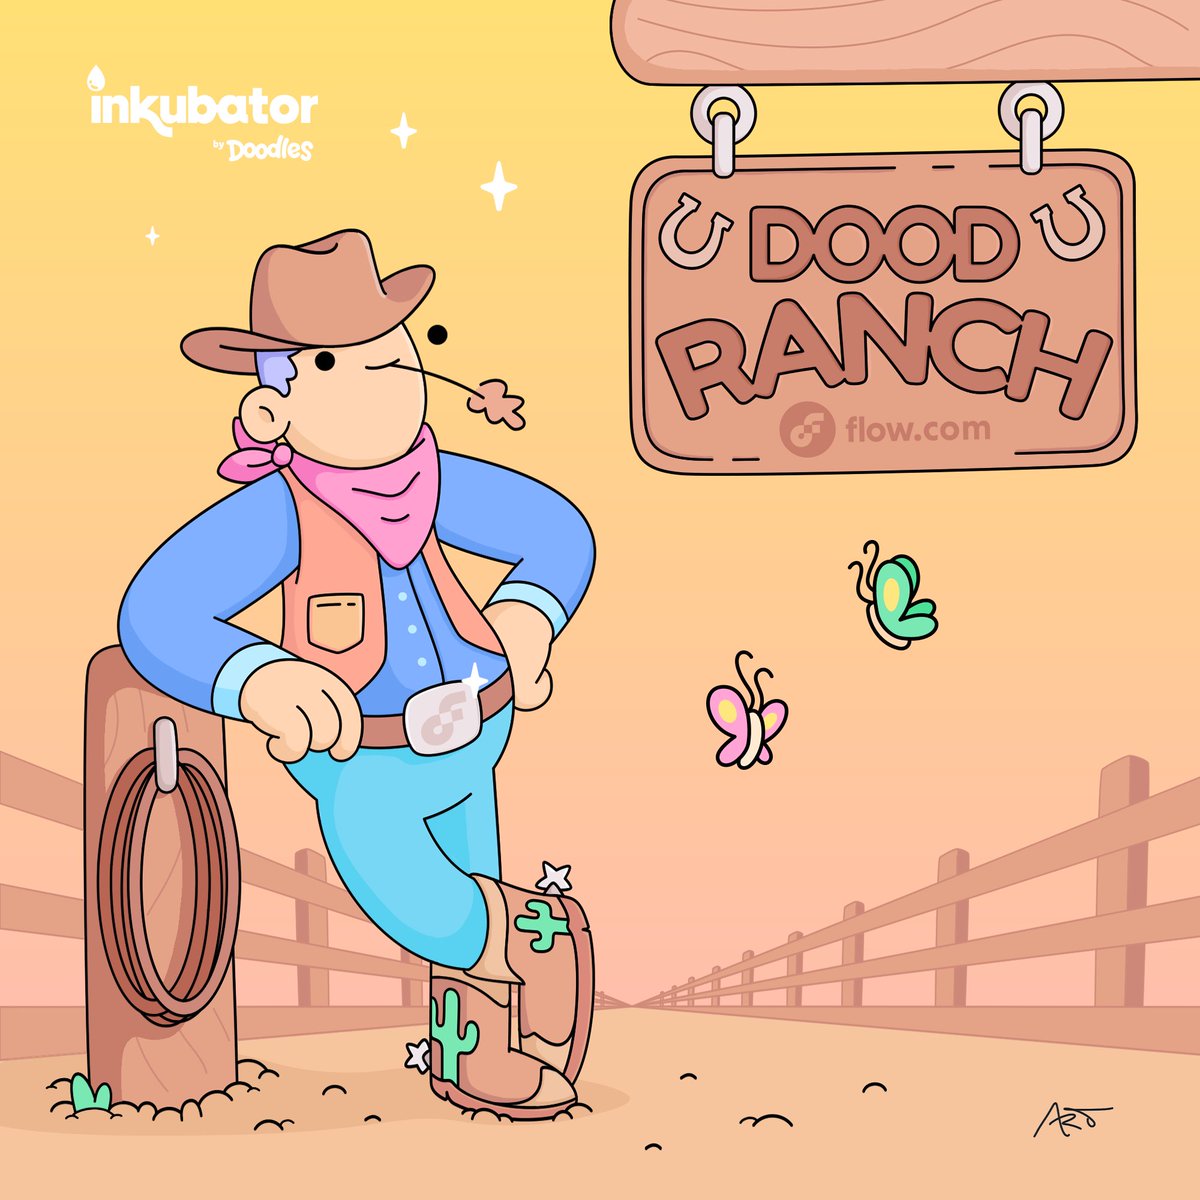 dood ranch 🌵 calling all @doodles holders, join us for some good old fashioned texas bbq & brews! presented by @TGIDoodles during @consensus2024 powered by the Inkubator & @flow_blockchain date 5/30 time 6-9pm cst sign up below ⬇️